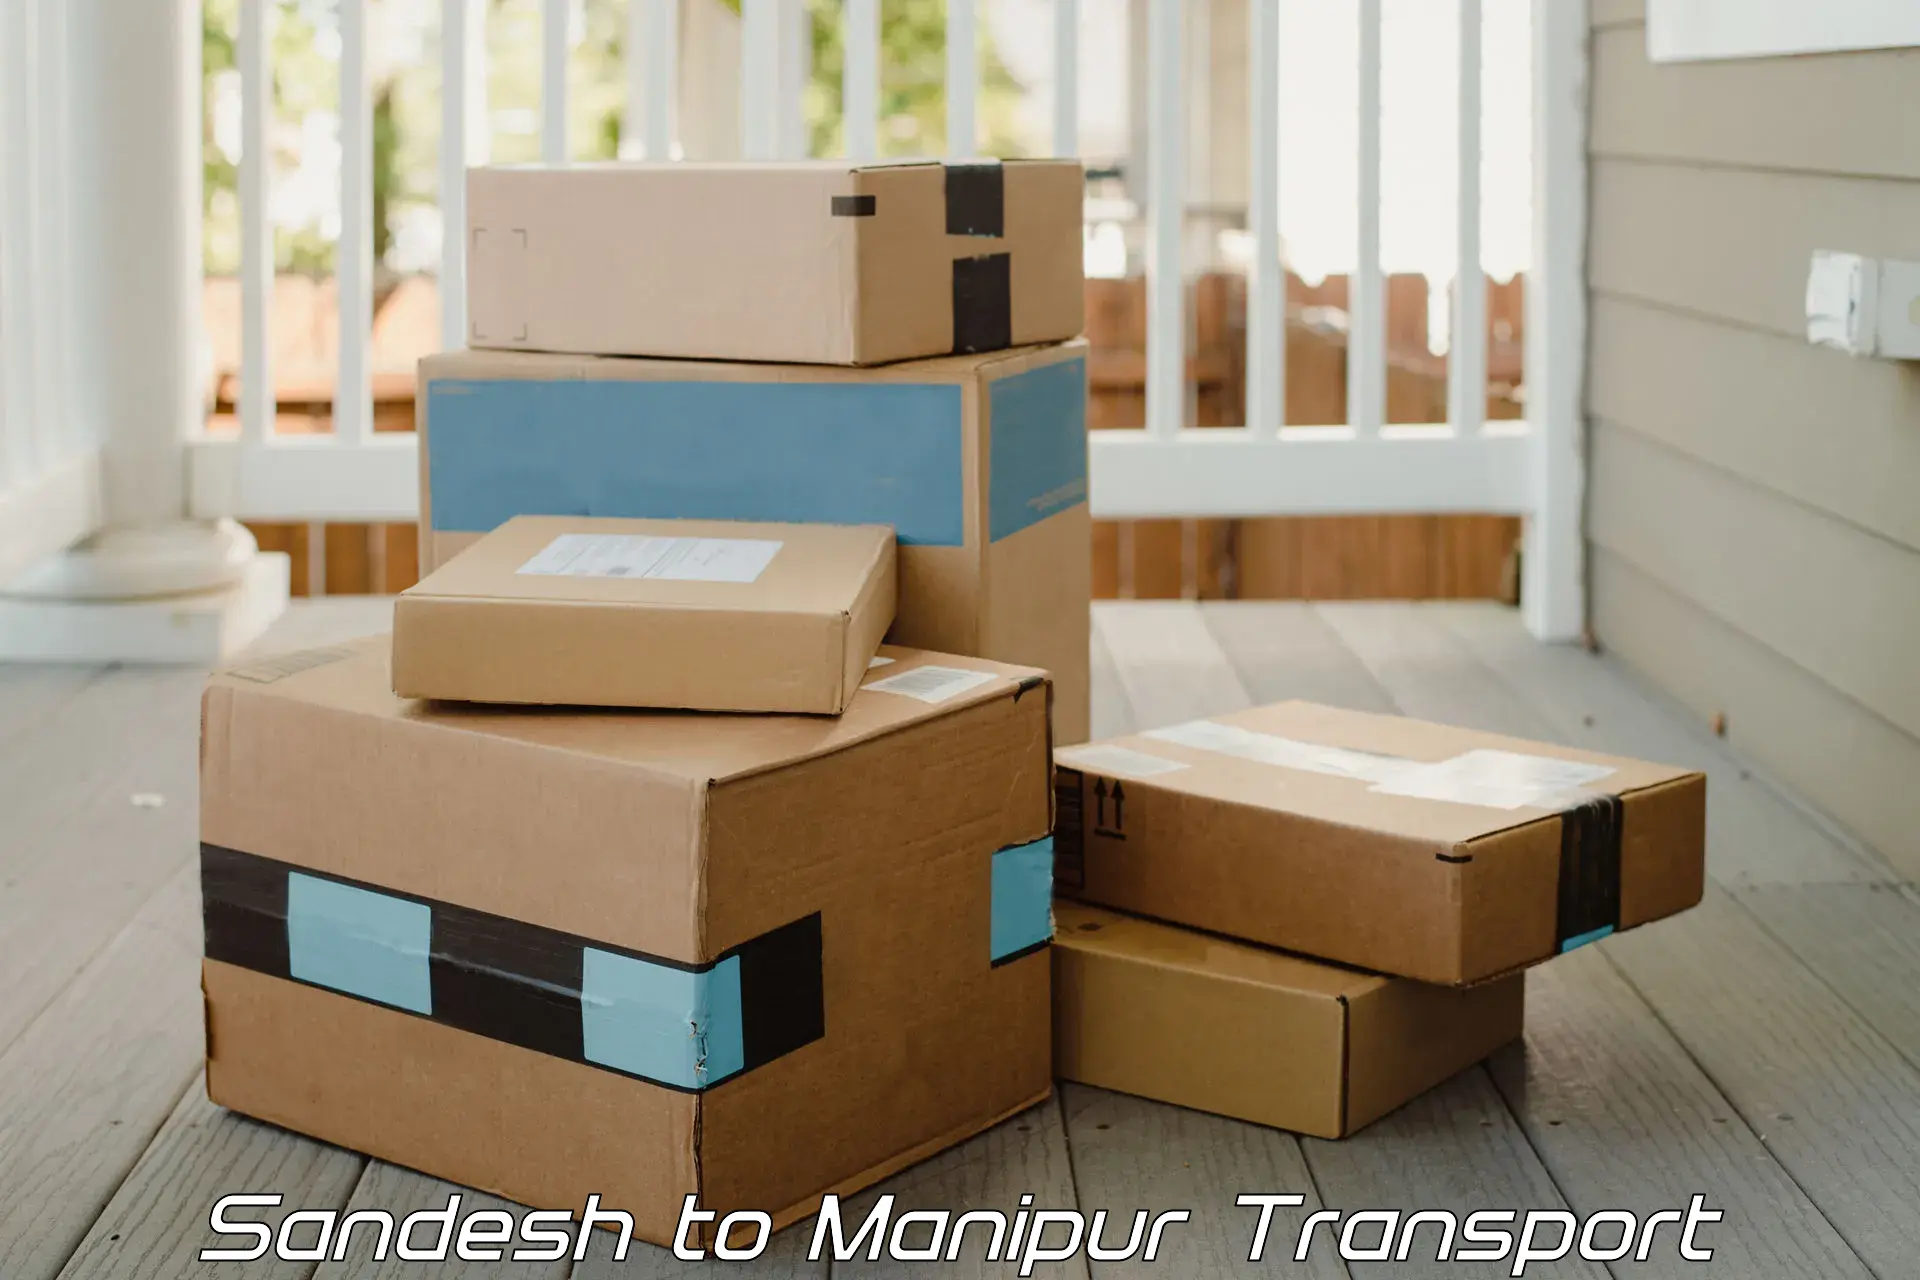 Delivery service Sandesh to Manipur